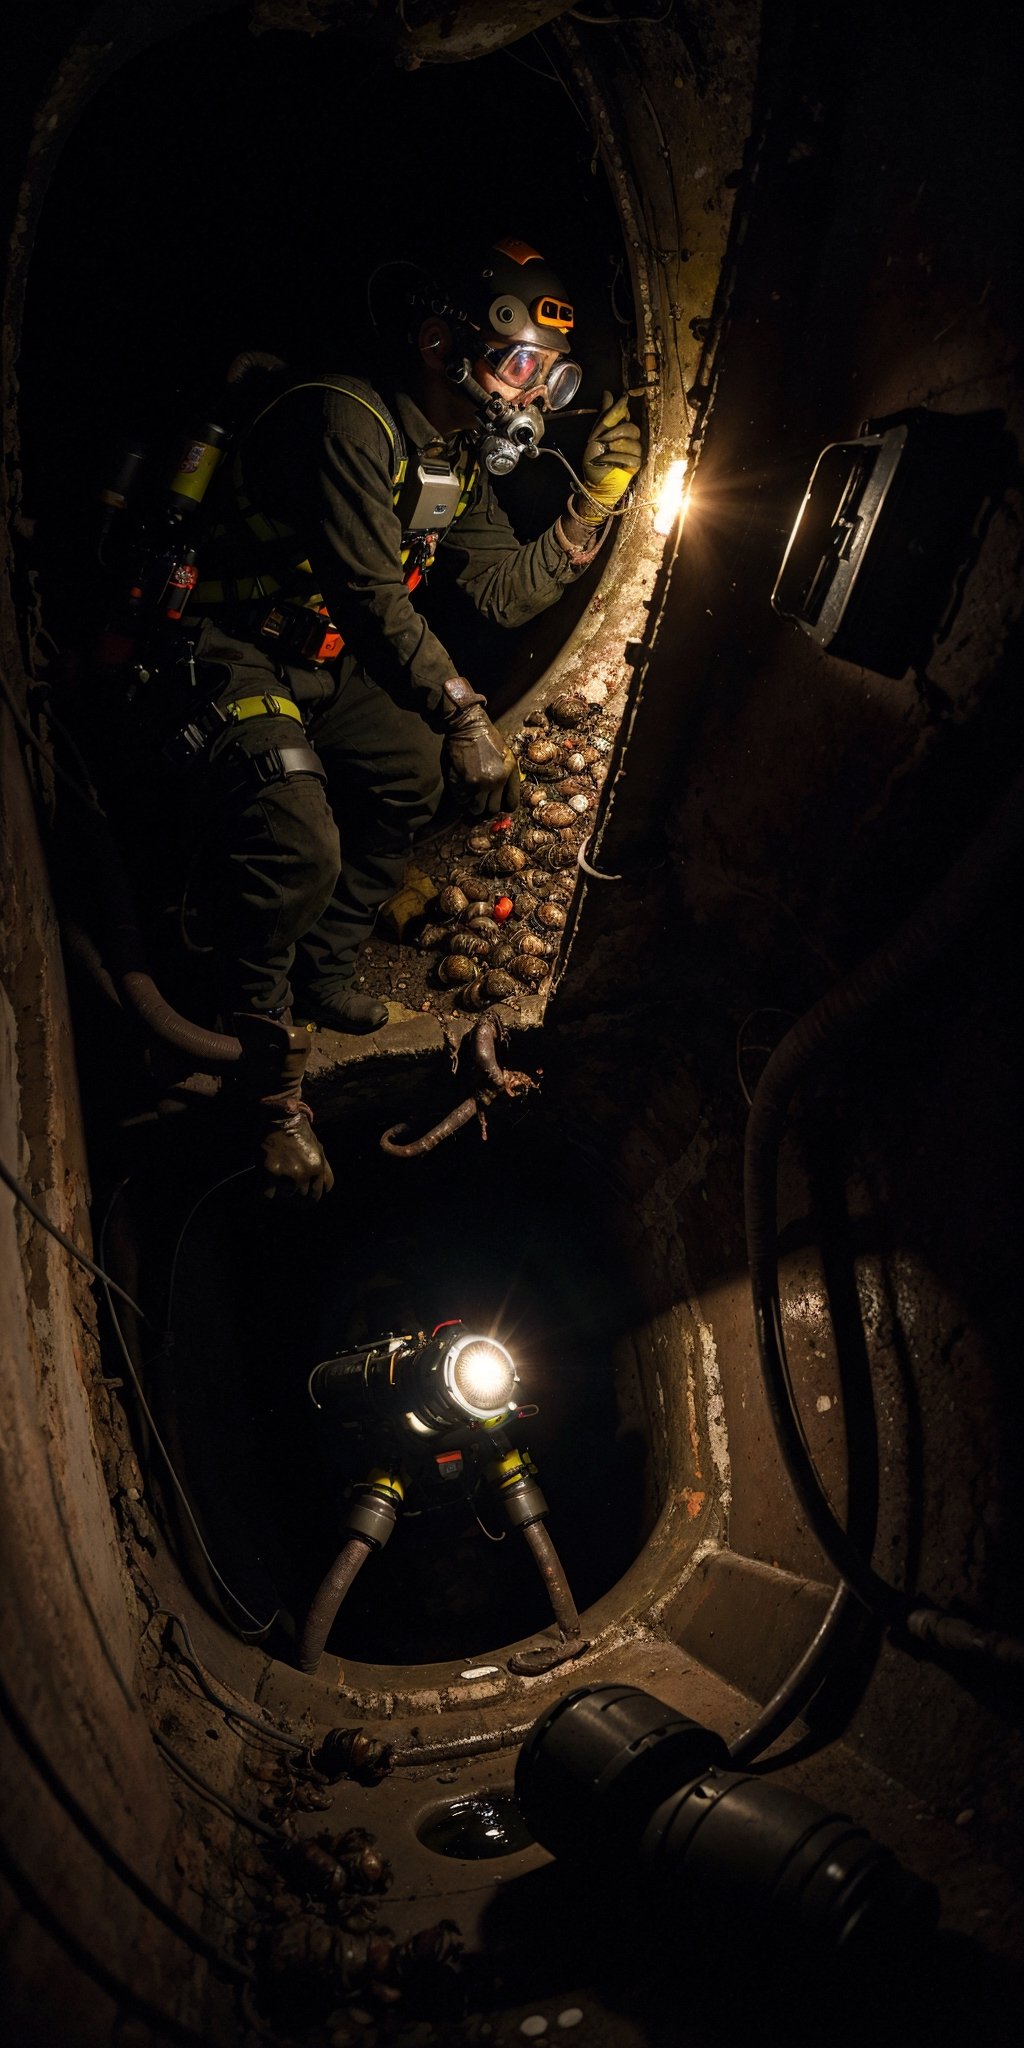 An inspector drone at Los Angeles Sewer line, using a Self Contained breathing apparatus, harnessed, hard hard, googles, gloves,  radio to communicate, flashlights, descending trough a sewer manhole using a harness line attached to a tripod into a giant vault, humid, water vapor, mold, dim lights, (((rats, cockroaches, feces)))